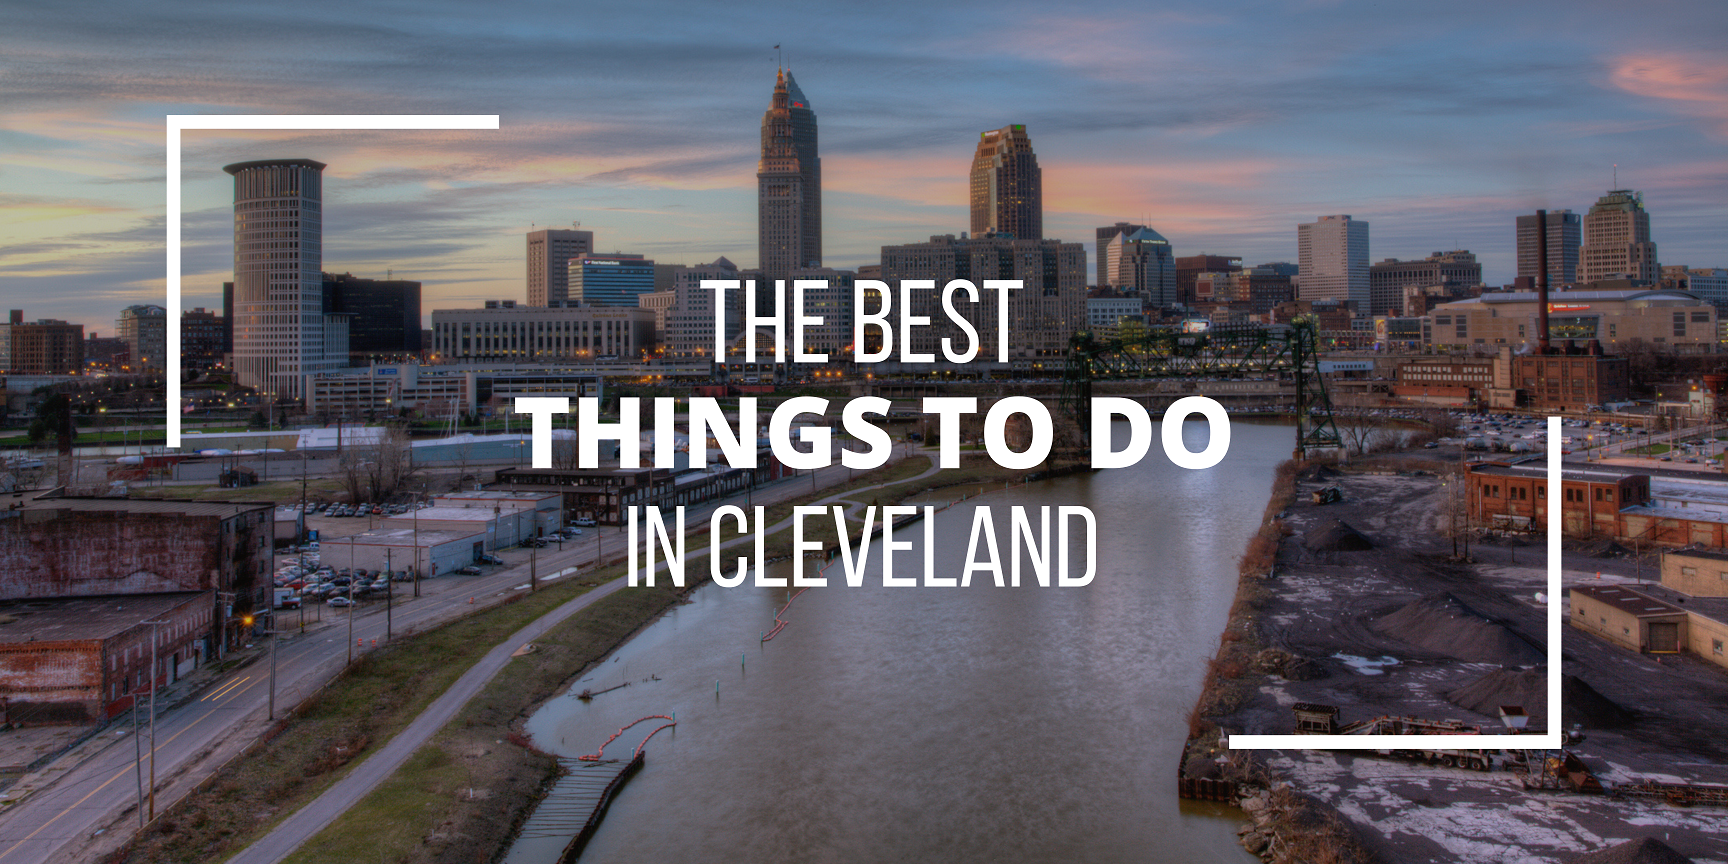 The Best Things To Do In Cleveland: 27 Top-Rated Attractions & Hidden Gems